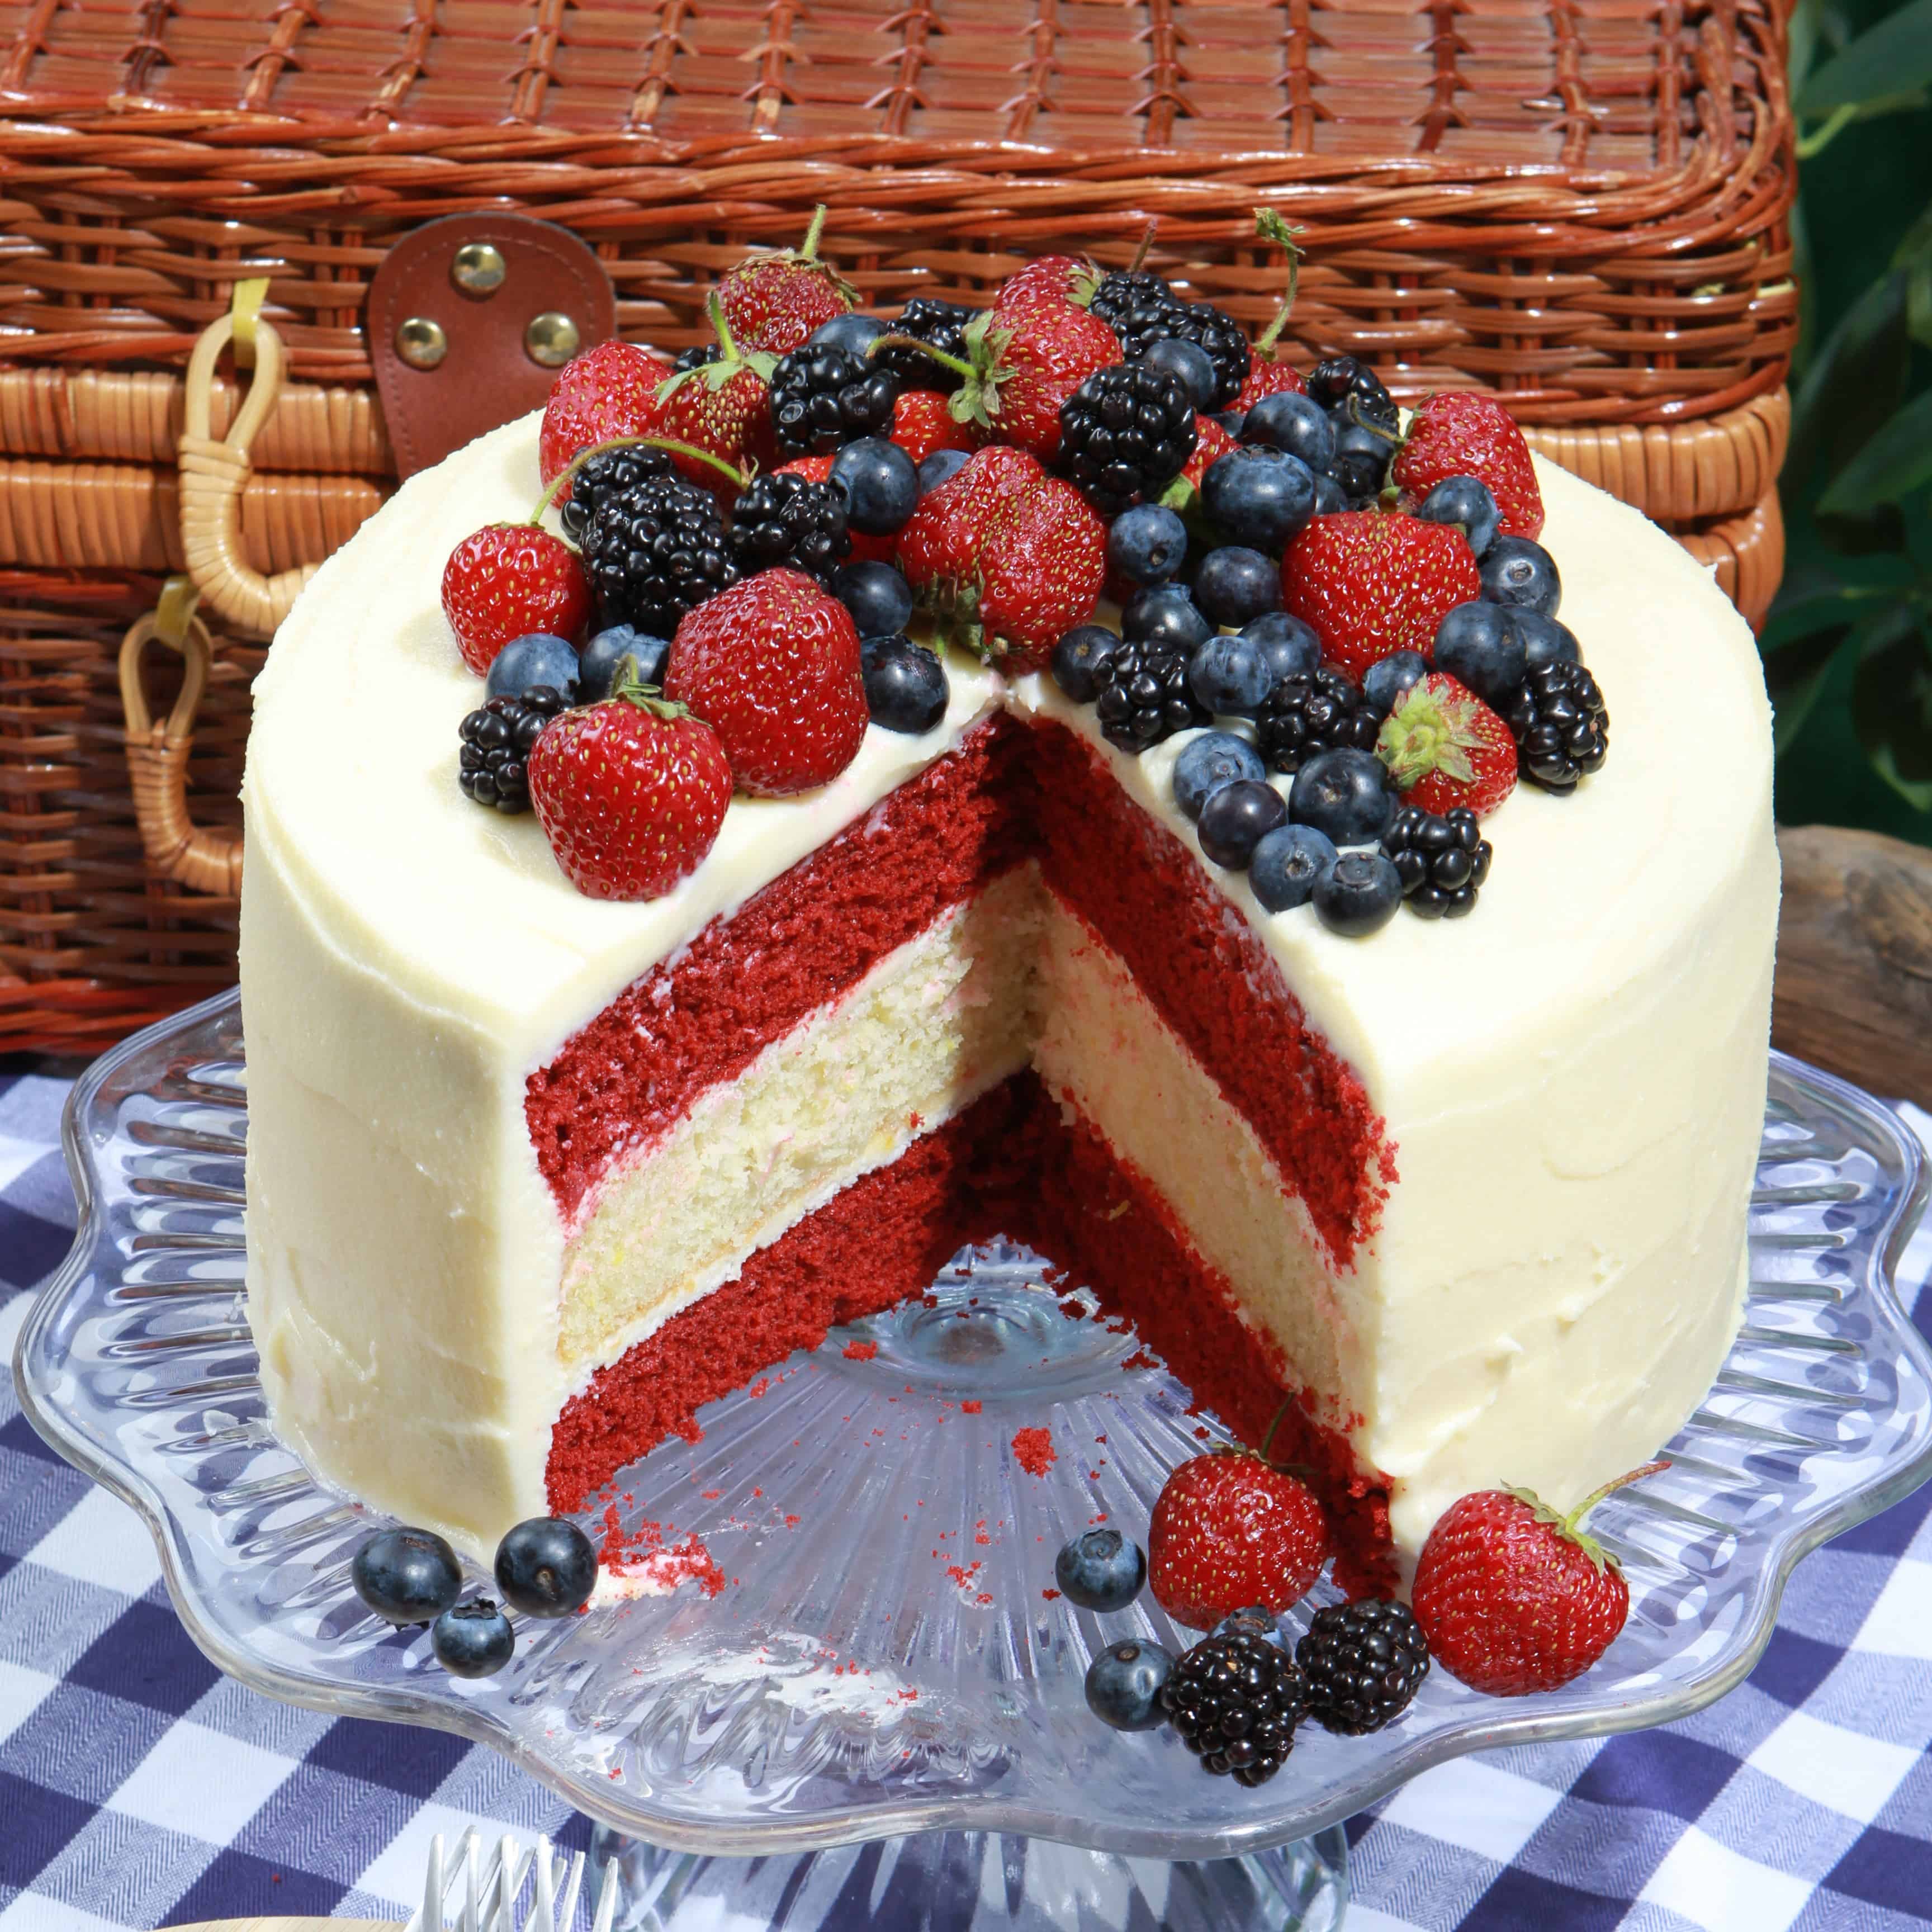 Red, white, and blue berry and sponge cake